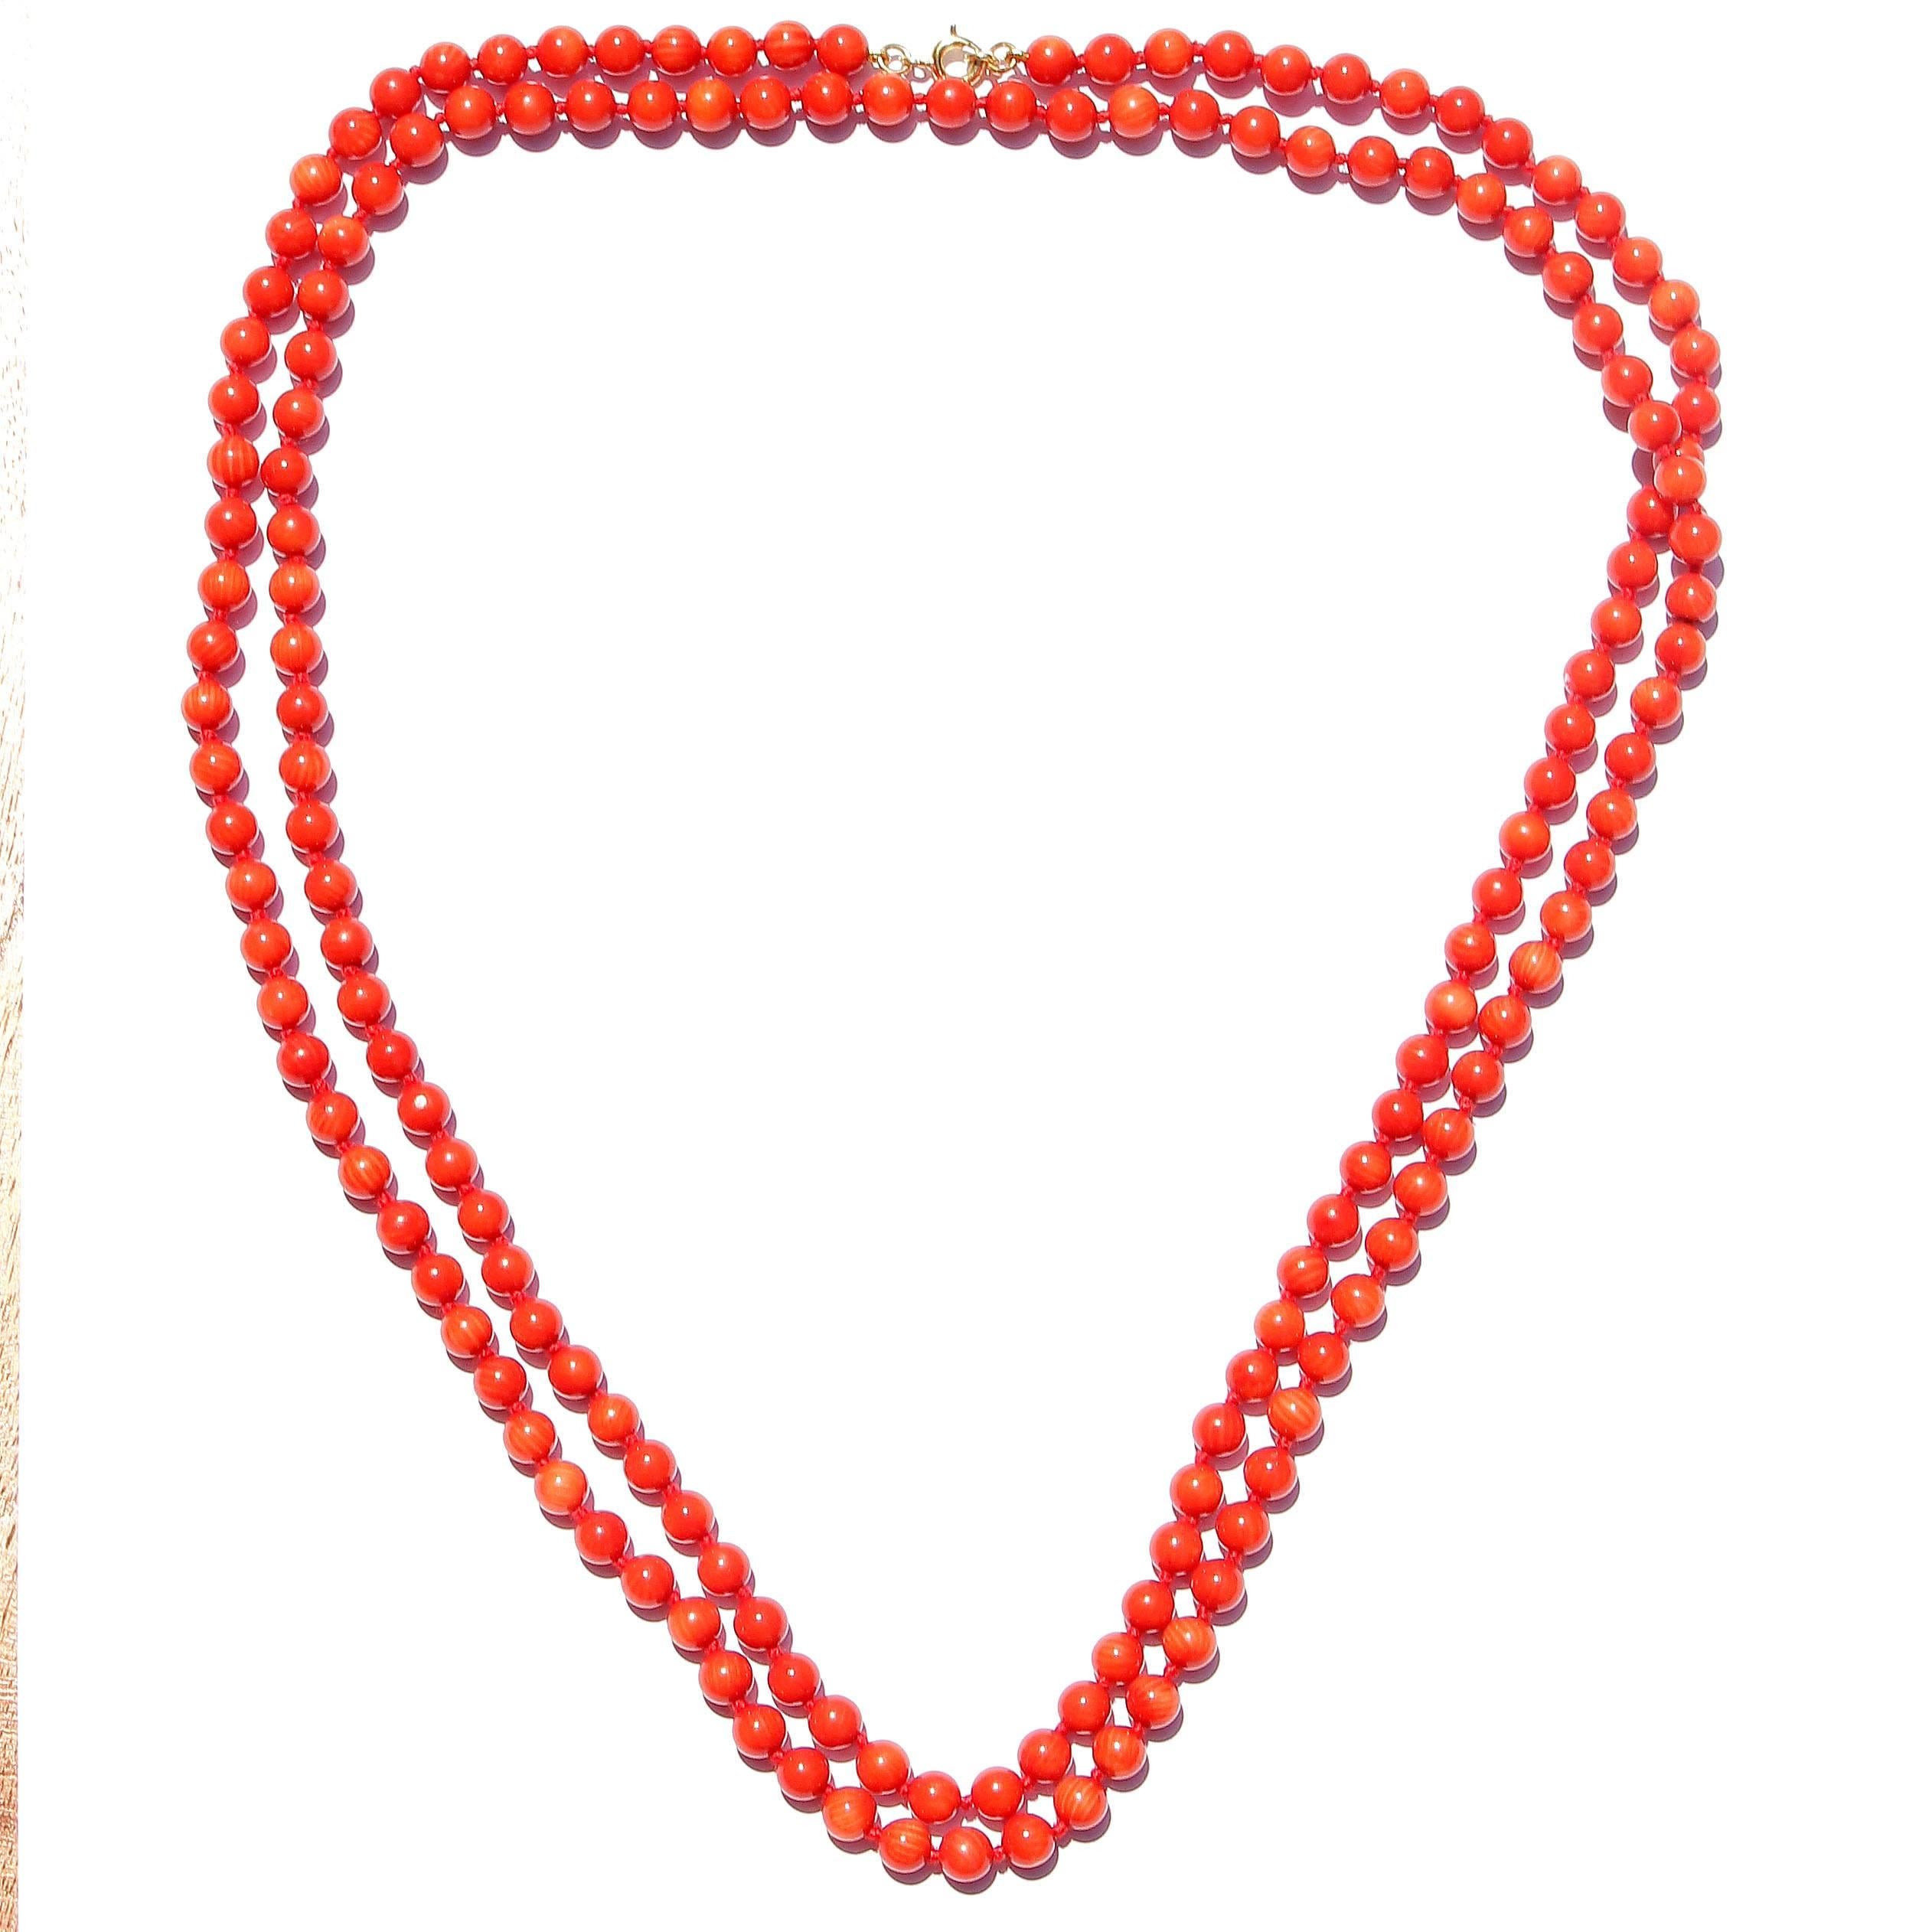 A well matched coral necklace of excellent quality. Crafted with an 18k yellow gold clasp.

45 inches long.